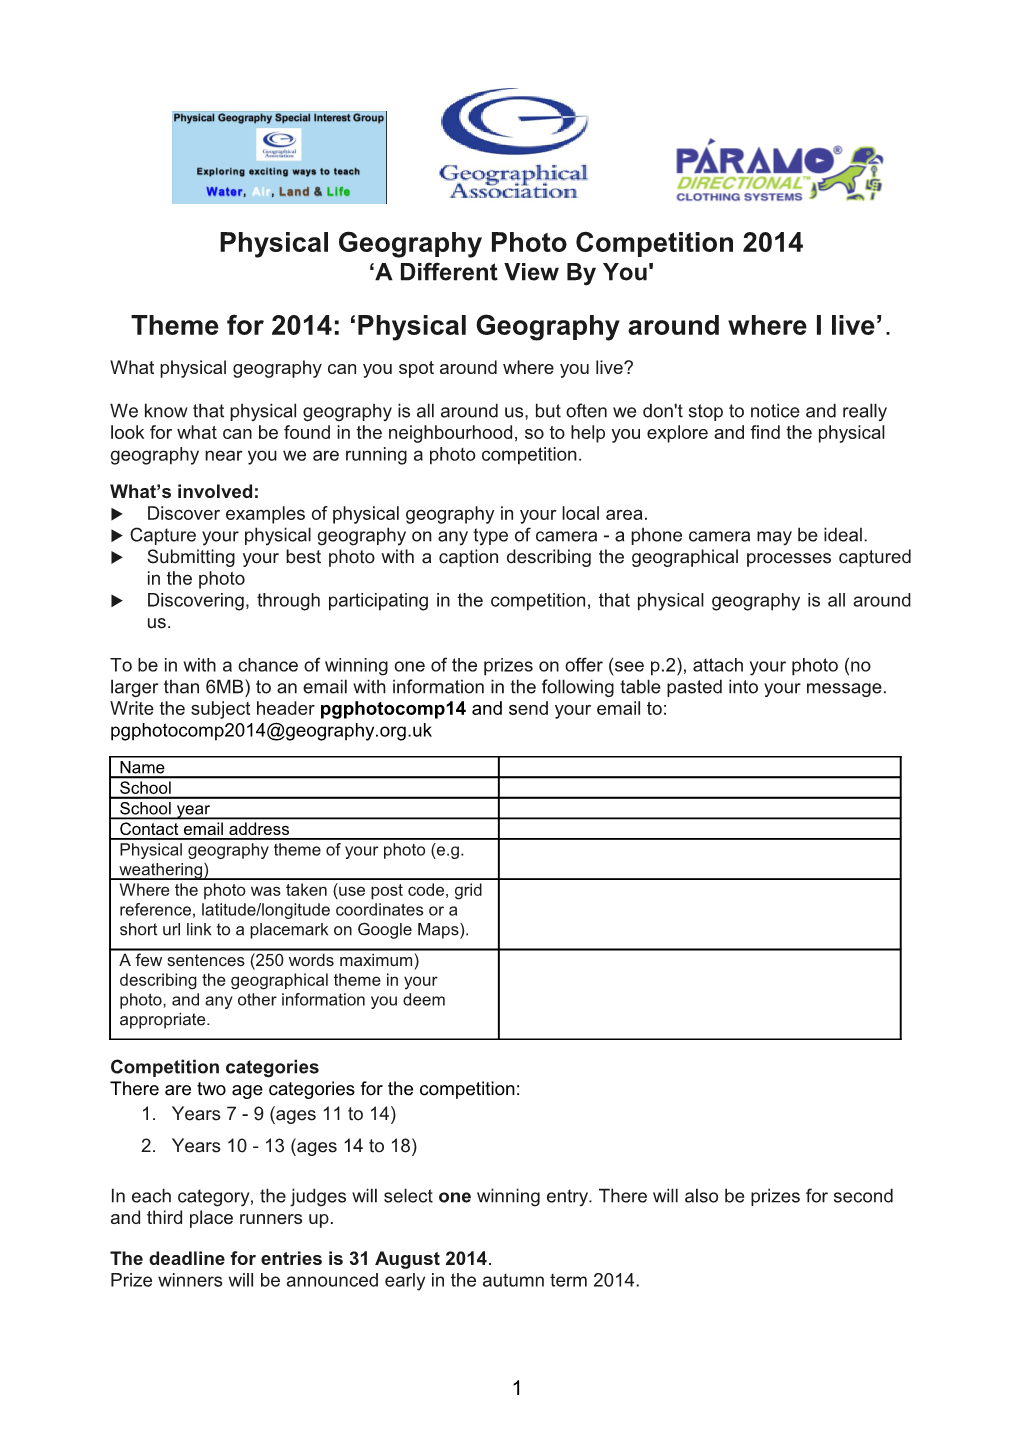 Physical Geography Photo Competition 2014